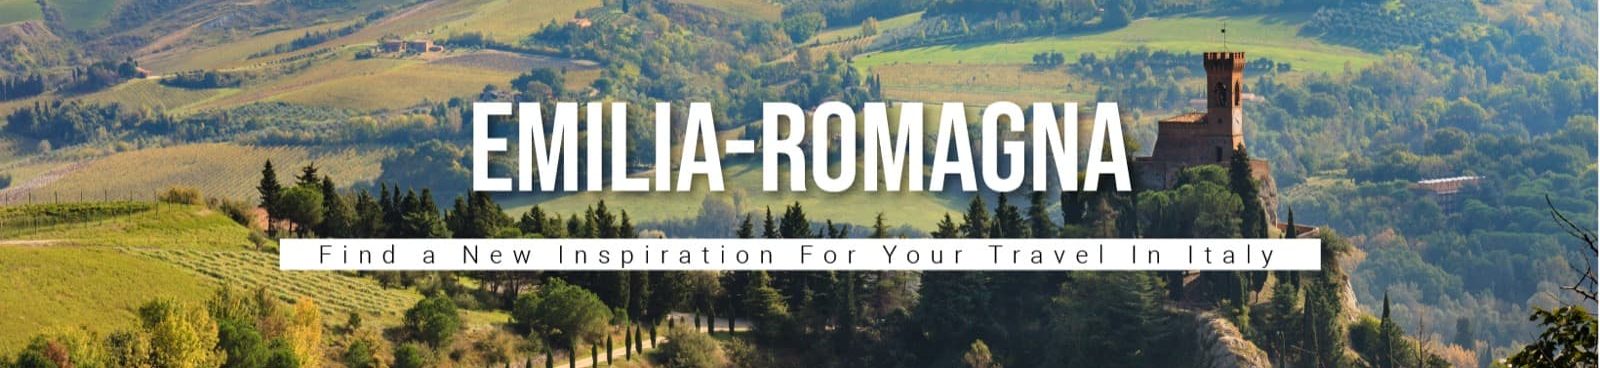 BlogVille 2015: Lombardy is calling!